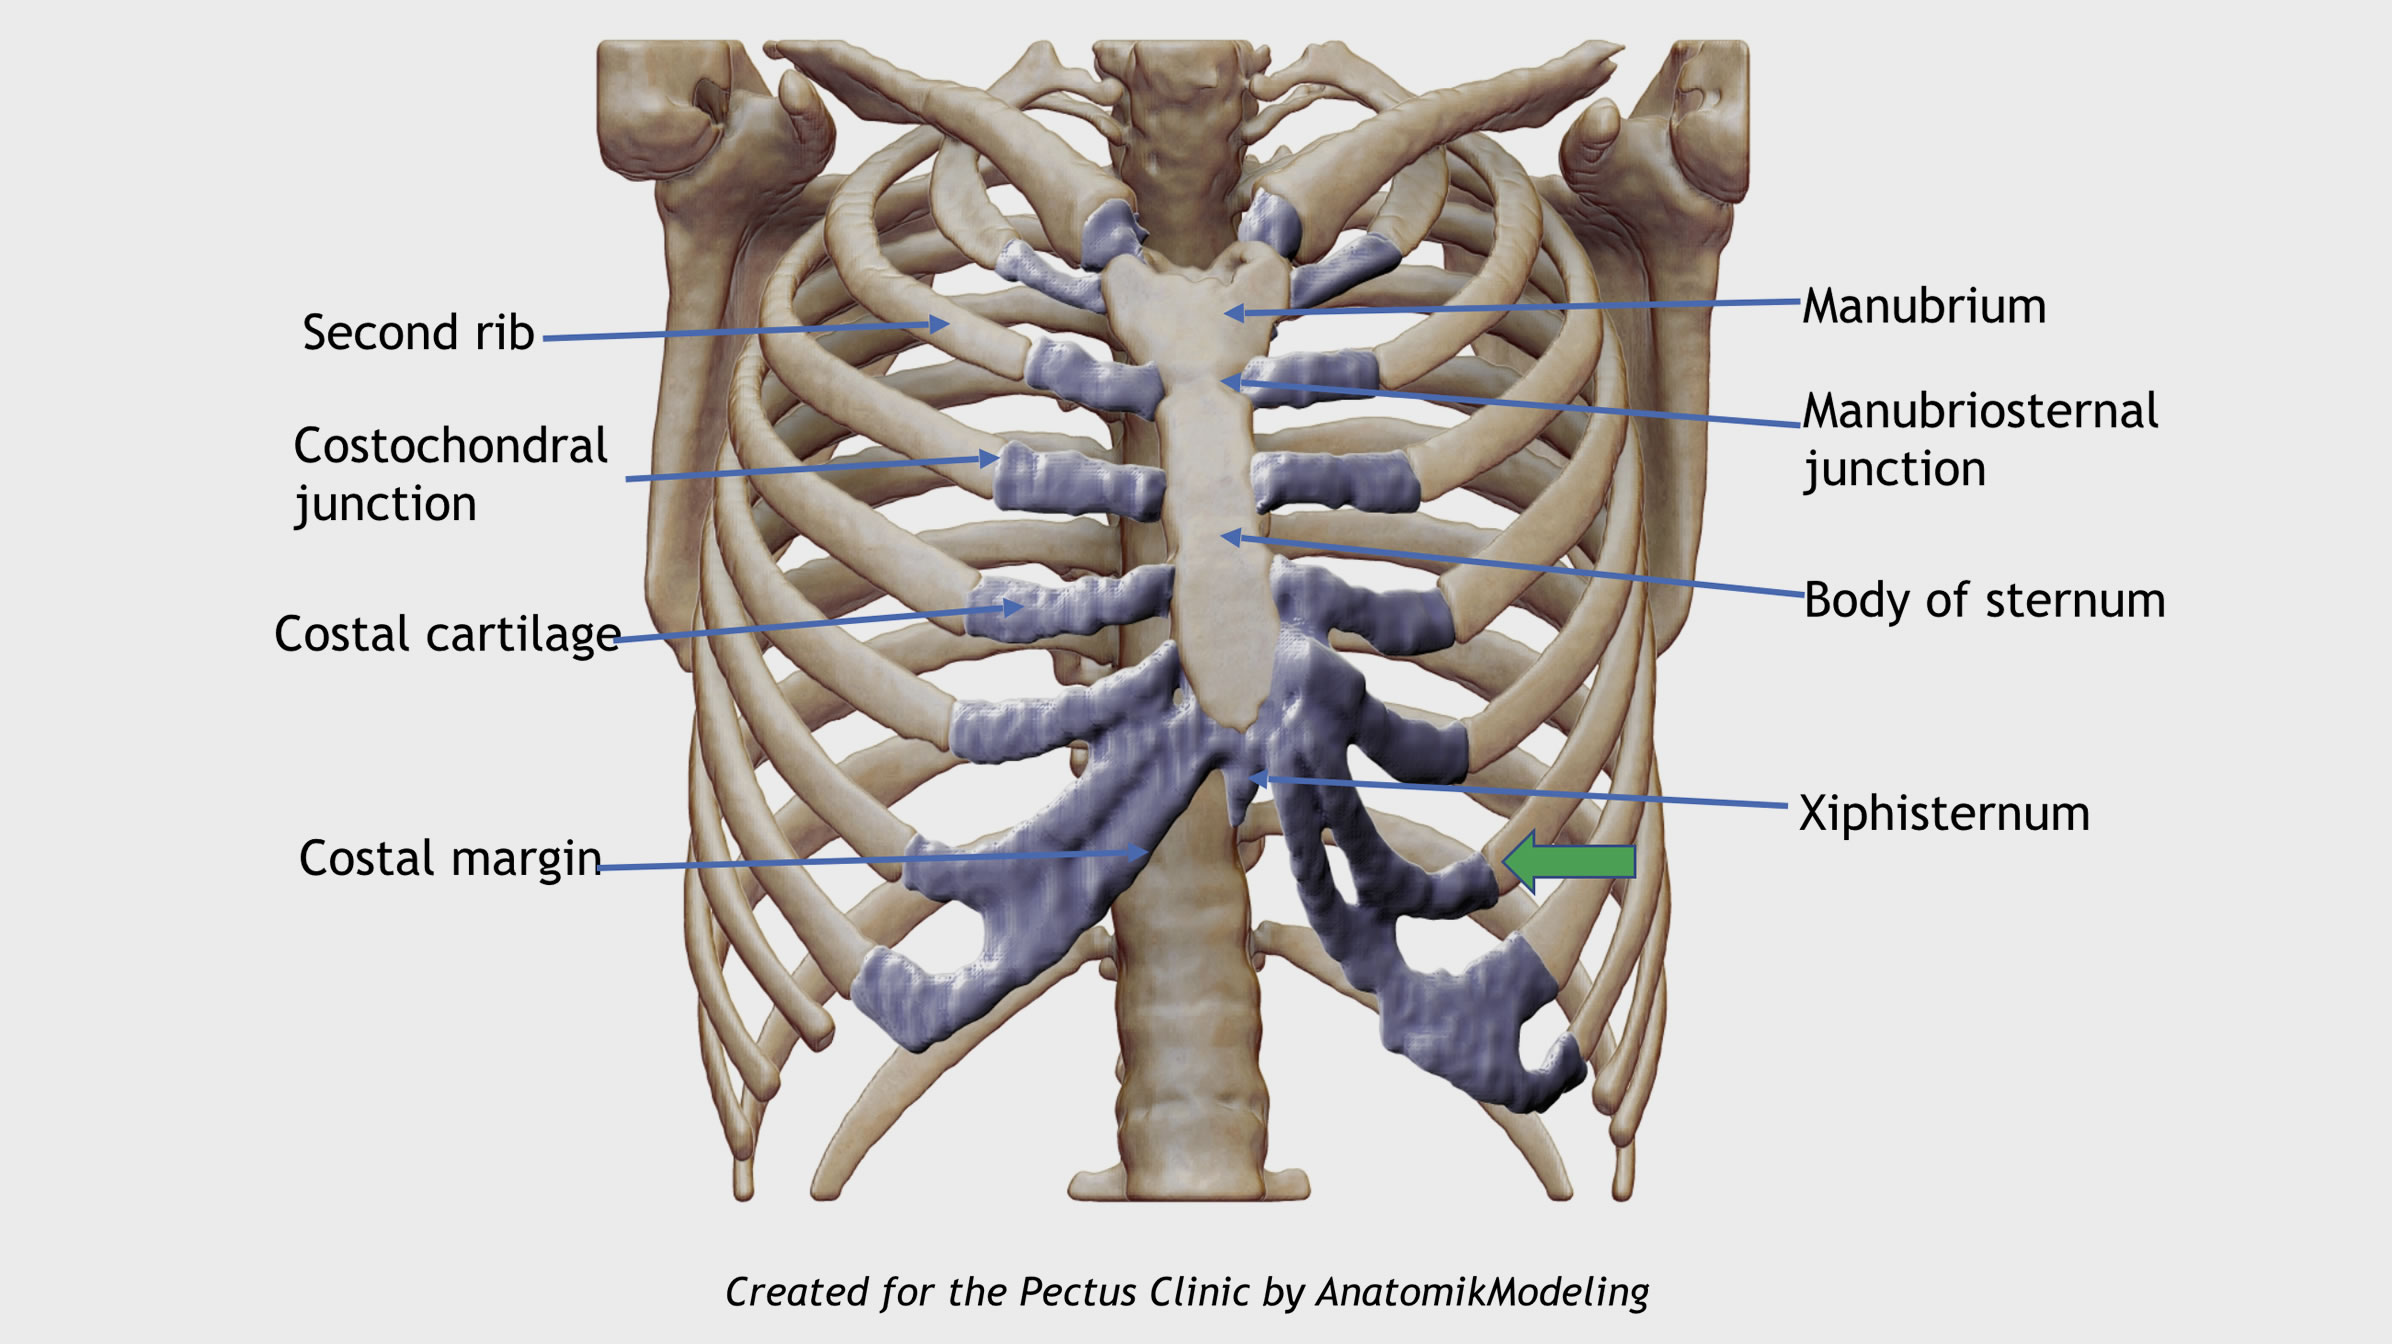 Anterior chest wall structures